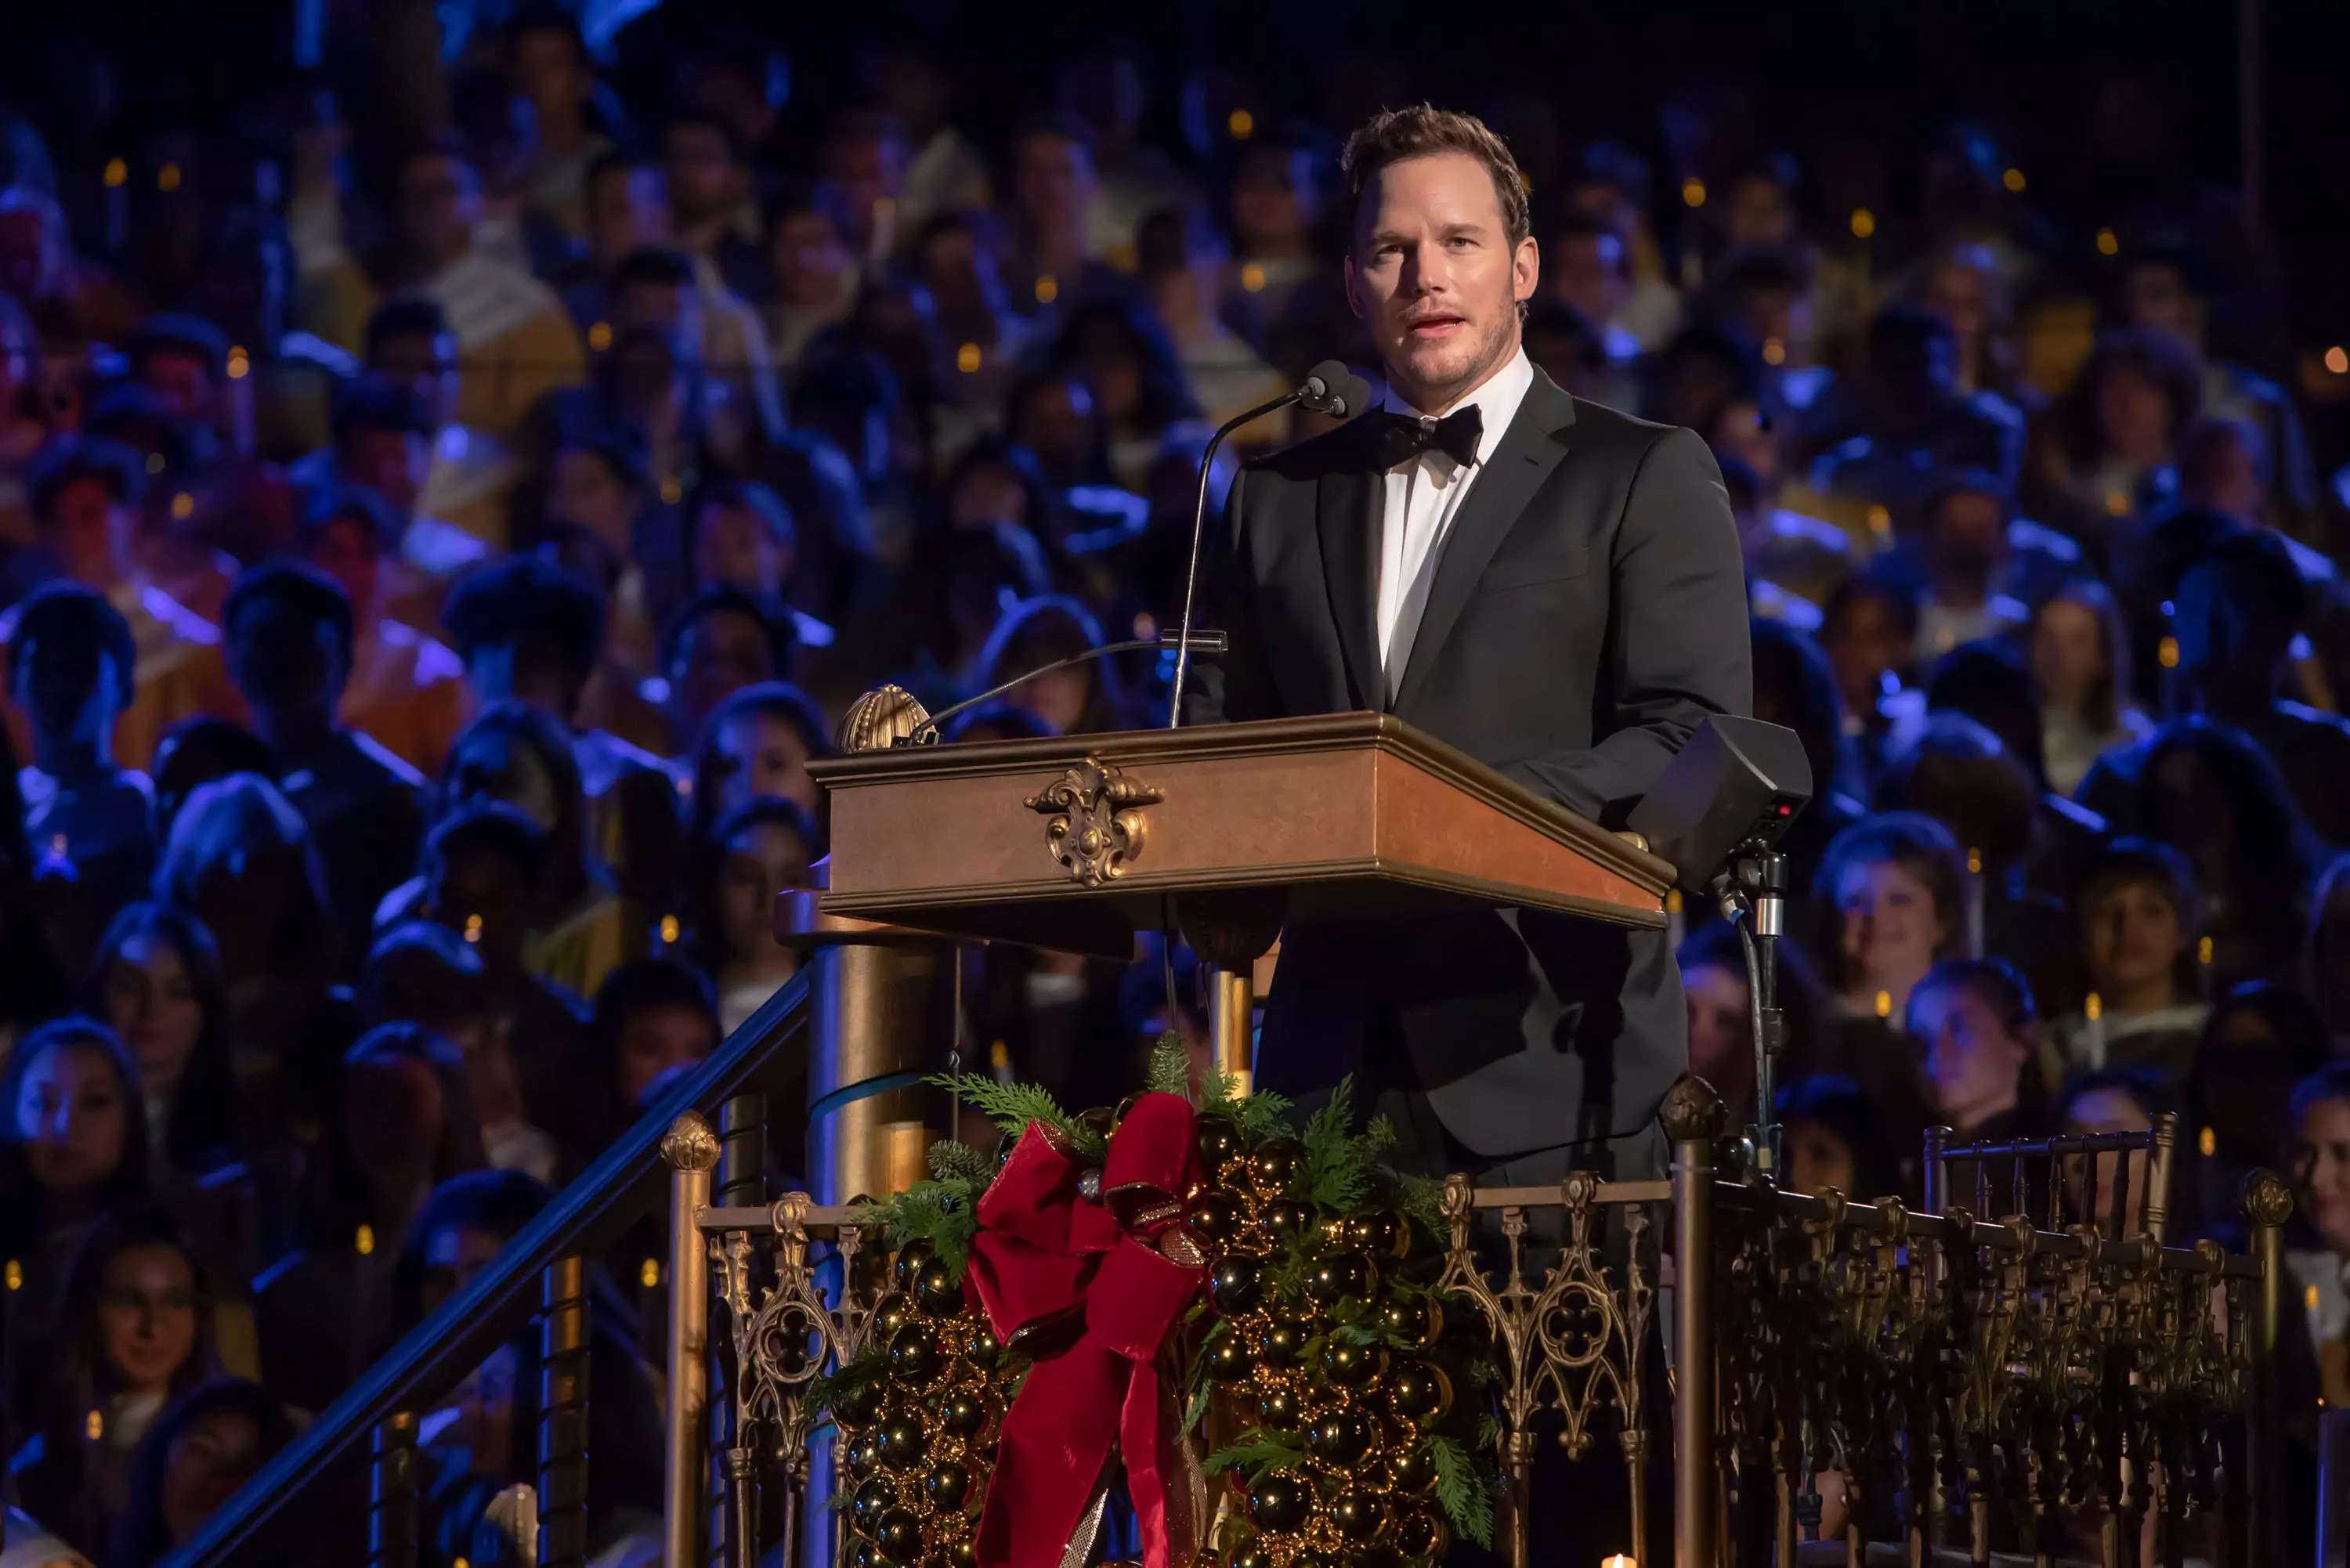 Chris Pratt narrates the story of Christmas during the annual Candlelight Processional.